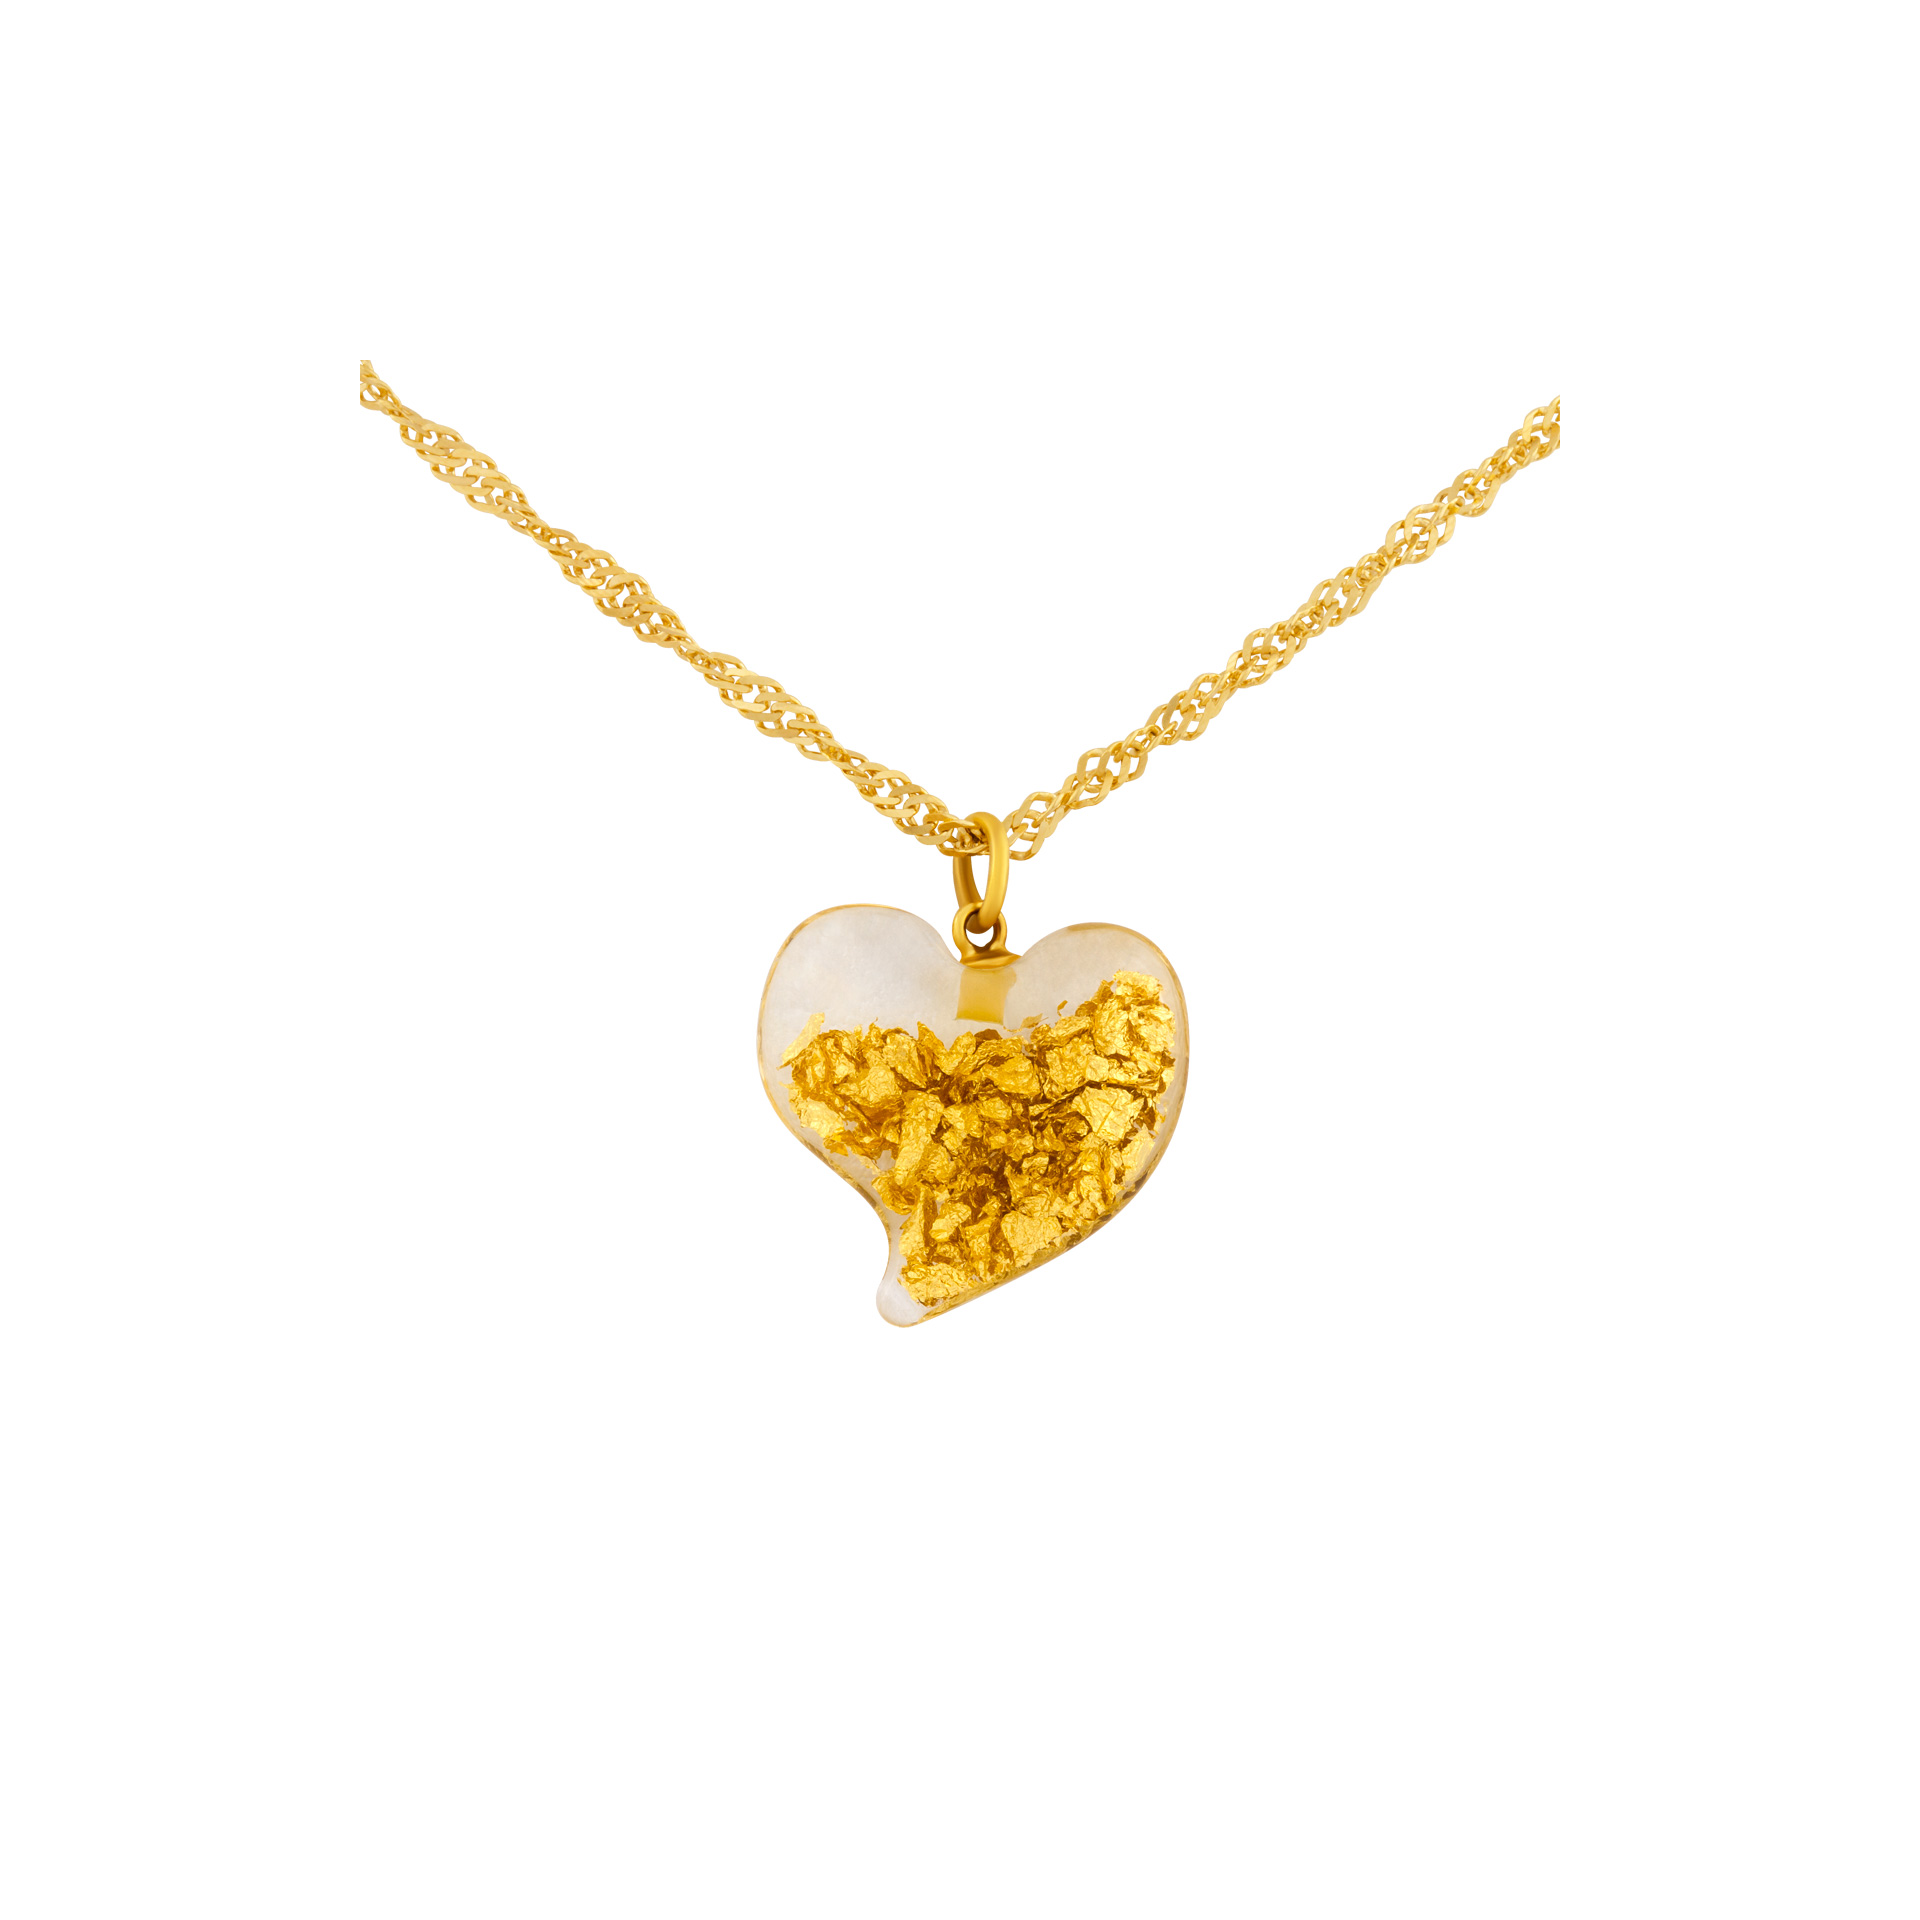 Unique glass heart pendant with flecks of gold captured in the heart. on 18k chain image 1